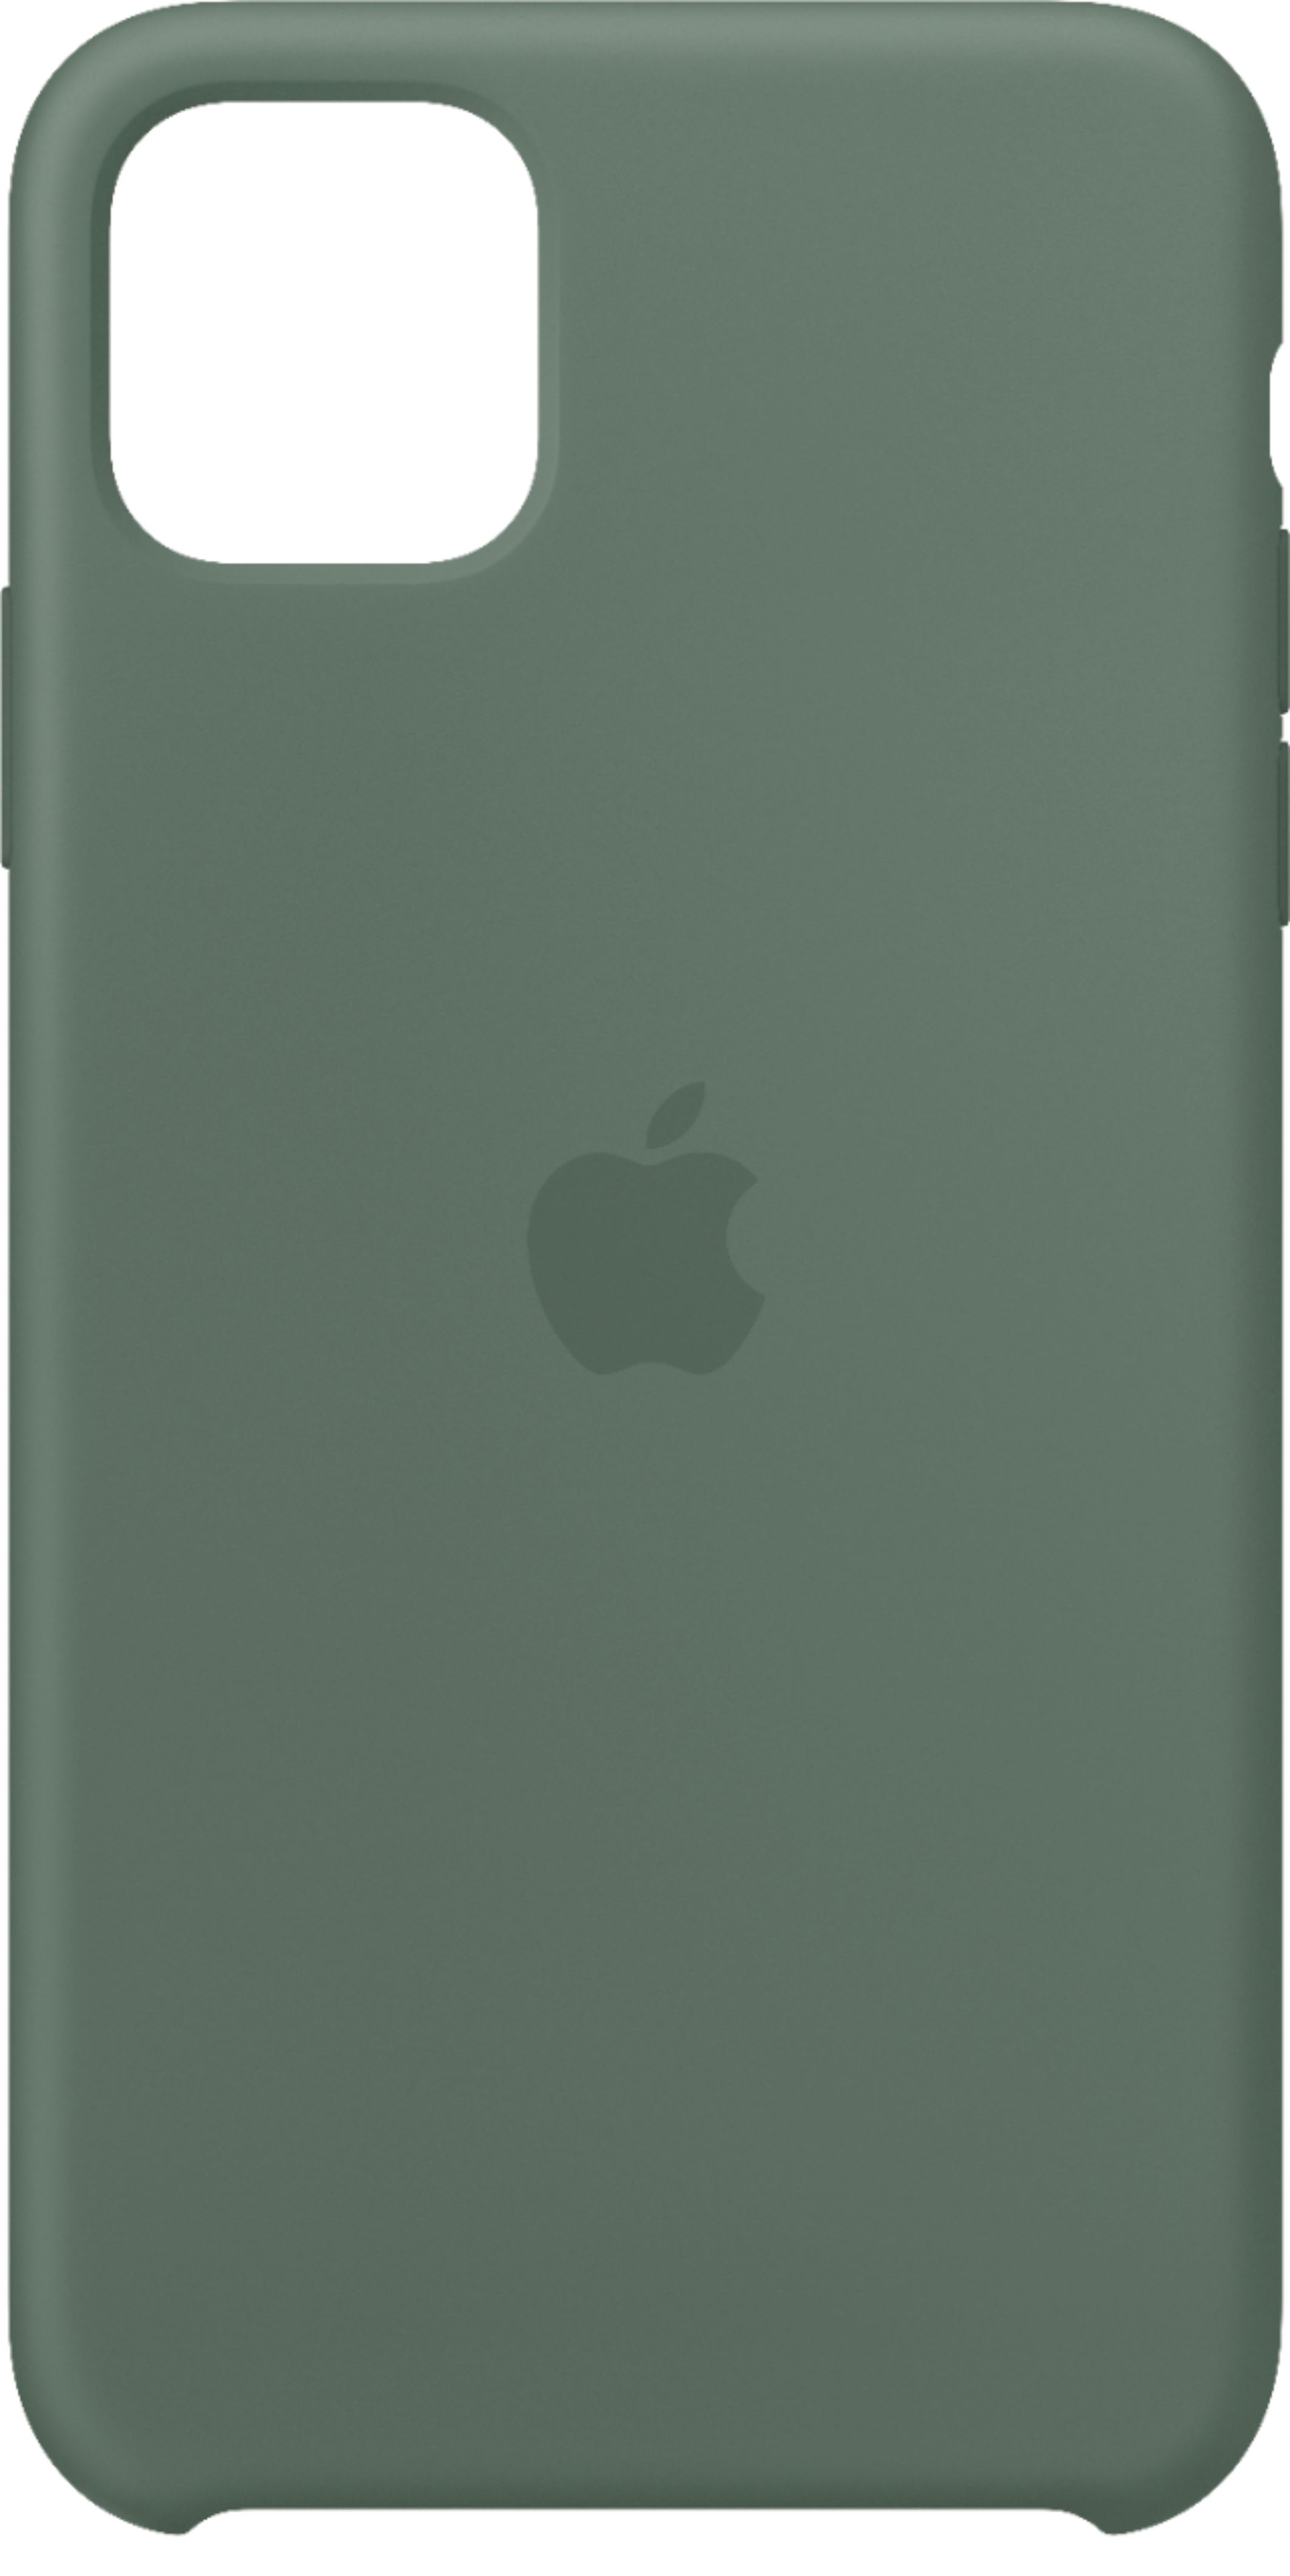 Apple Iphone 11 Pro Max Silicone Case Pine Green Mx012zm A Best Buy